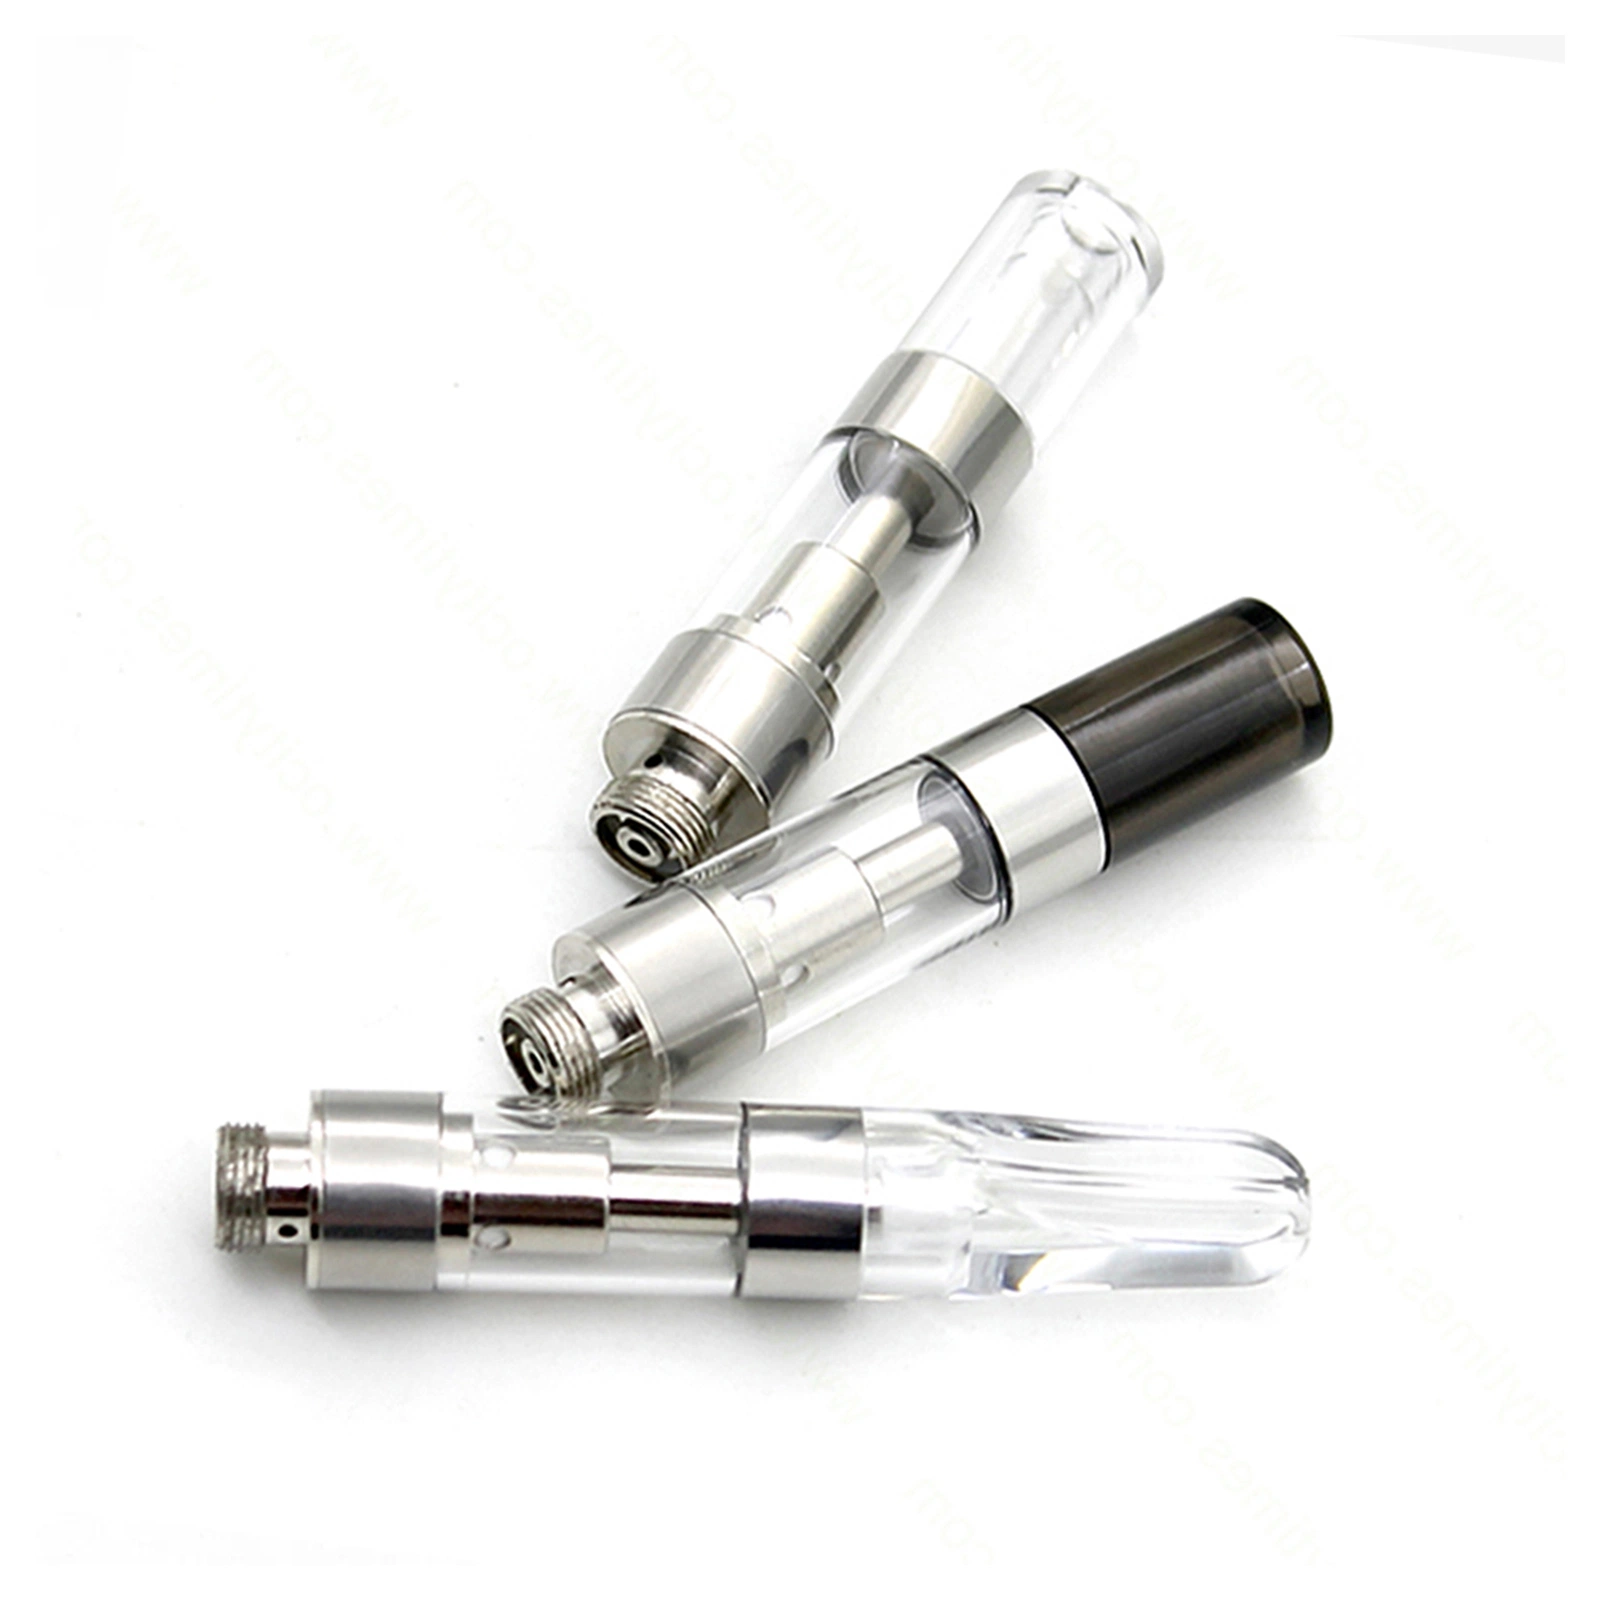 Hot Sale and New 510 Thread Thick Oil Lead Free Ceramic Coil Cartridge Empty Vape Pen Cartridge Suitable for 510 Battery